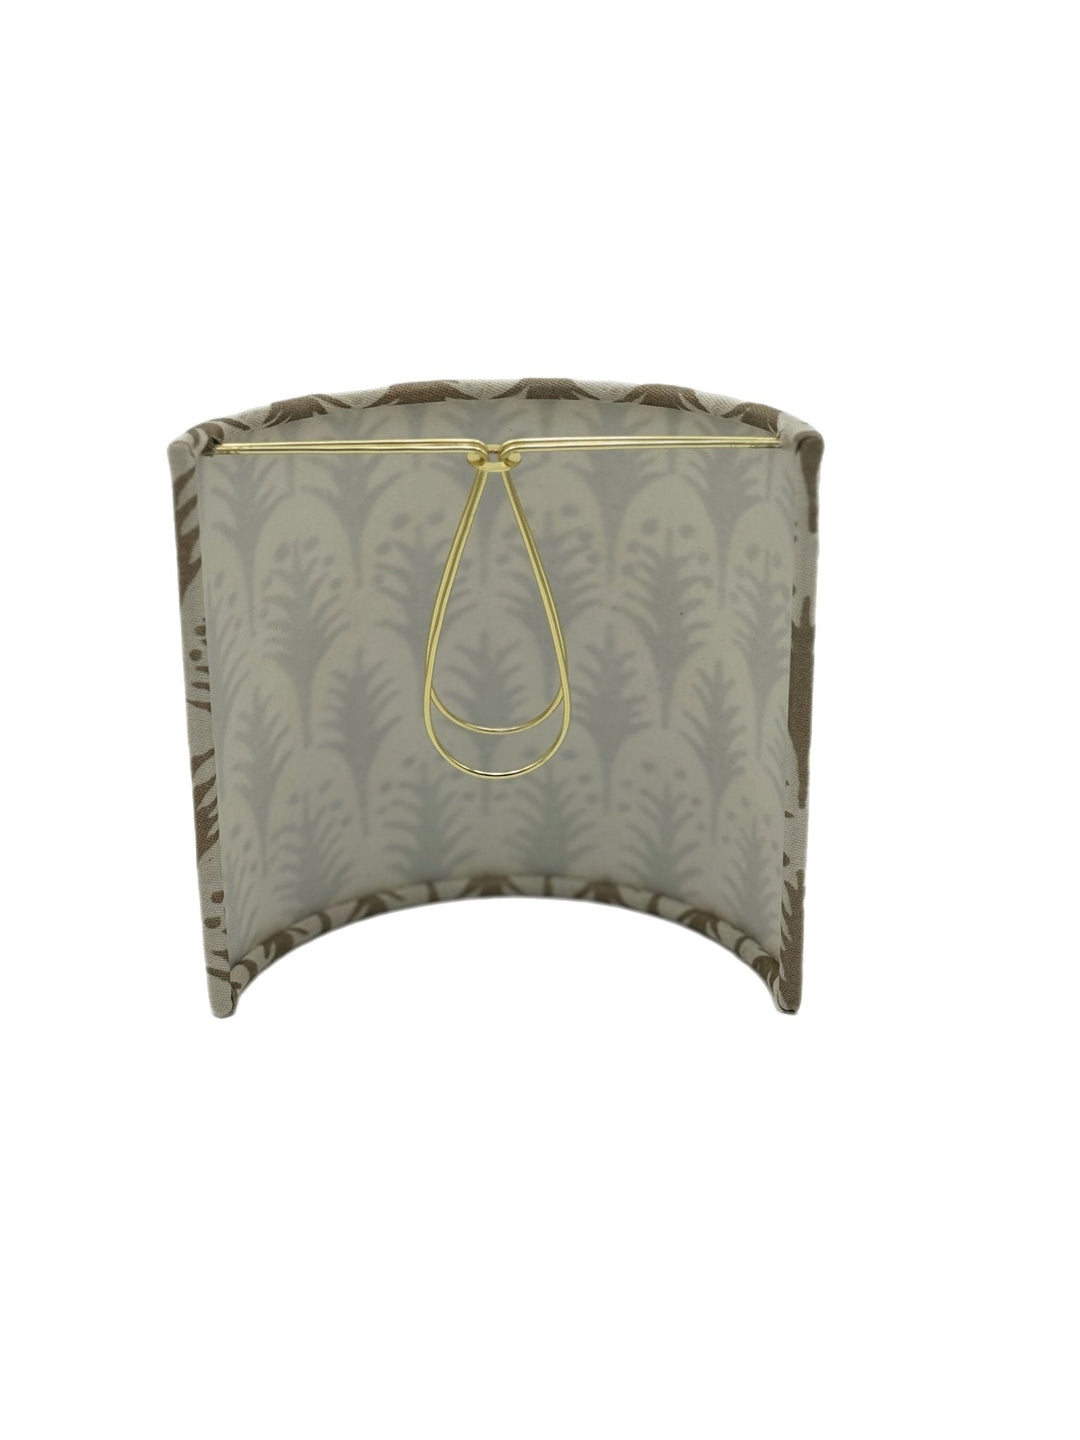 Half Drum Fortuny Piumette in Ivory & Gold - Limited Quantity - Lux Lamp Shades